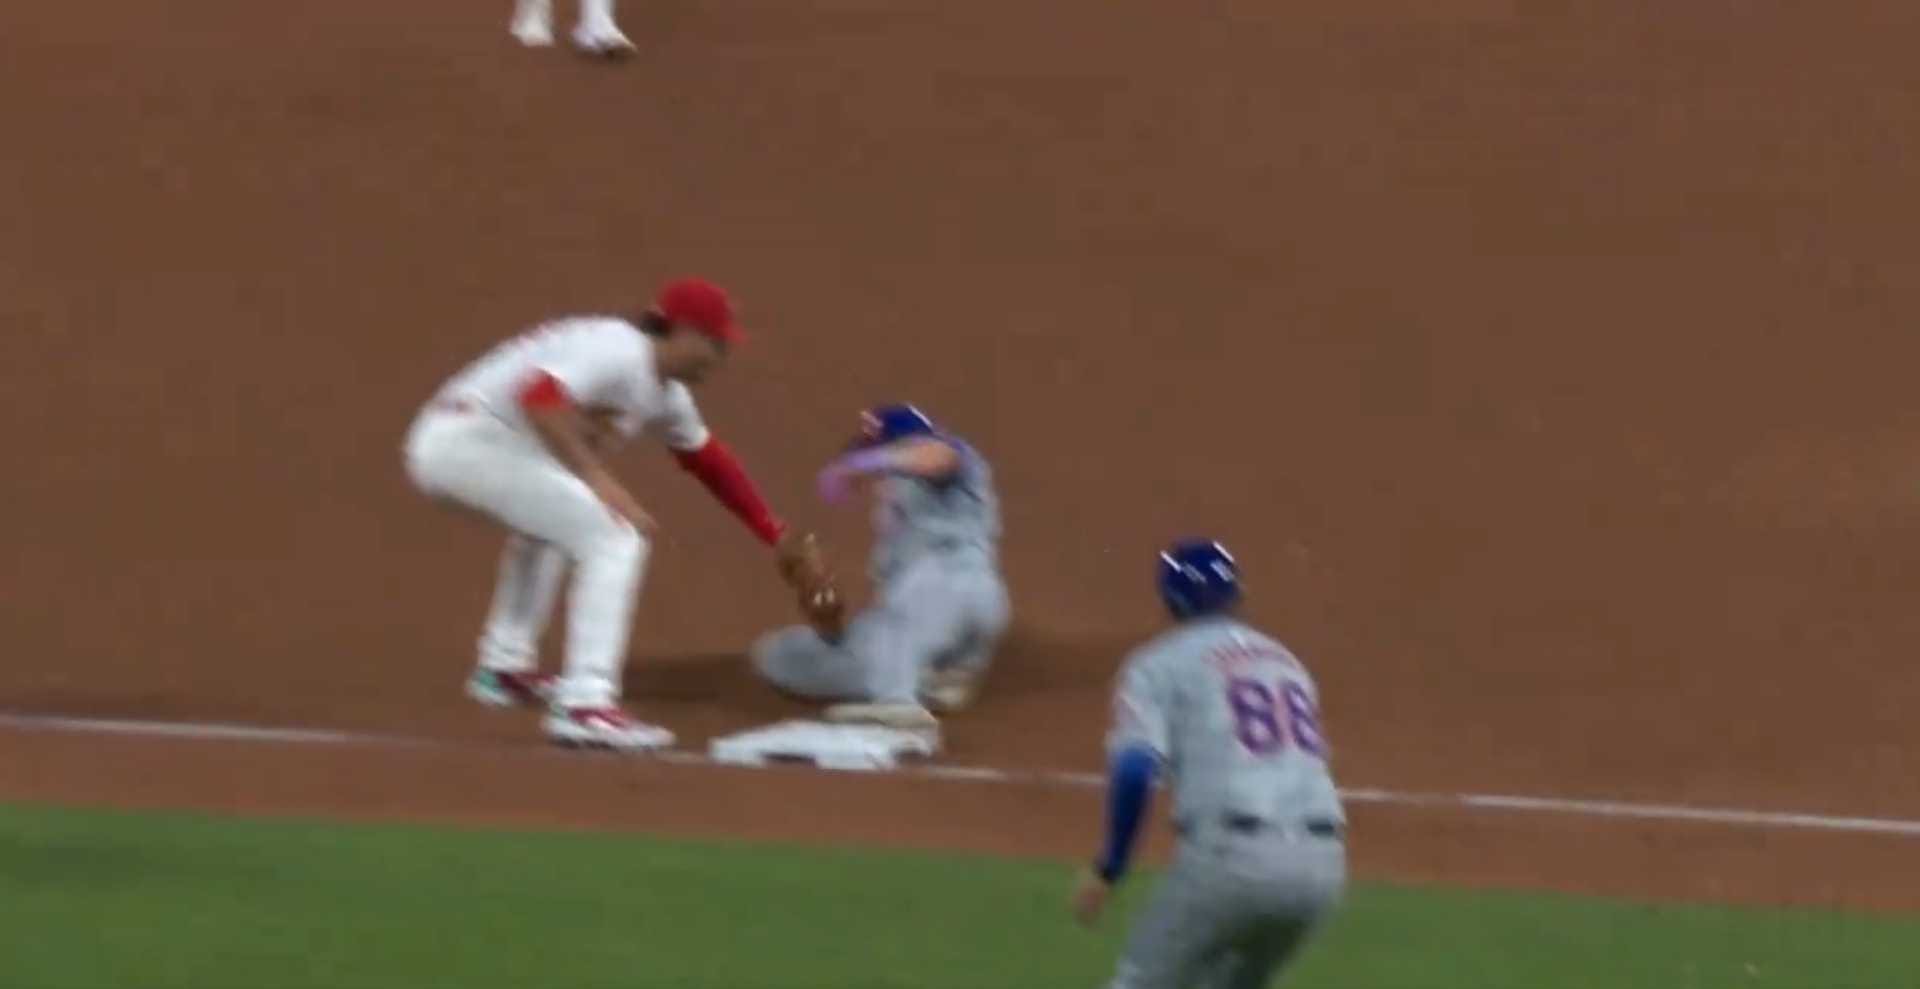 an umpire's terrible call on the mets' harrison bader somehow got confirmed after replay